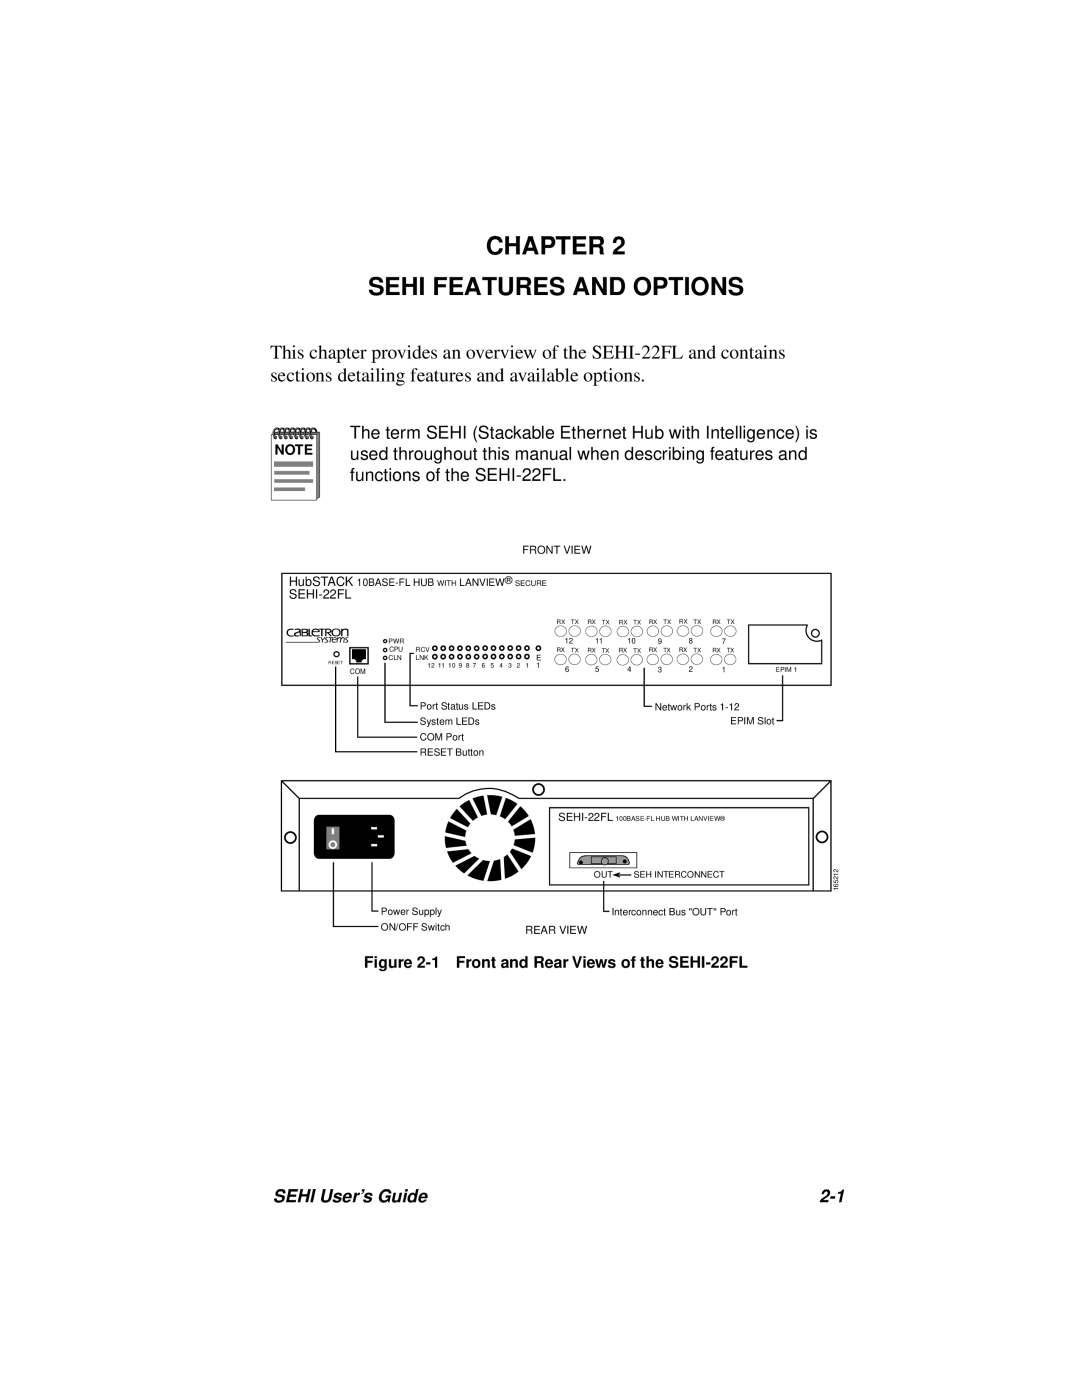 Cabletron Systems manual Chapter Sehi Features And Options, SEHI User’s Guide, 1 Front and Rear Views of the SEHI-22FL 